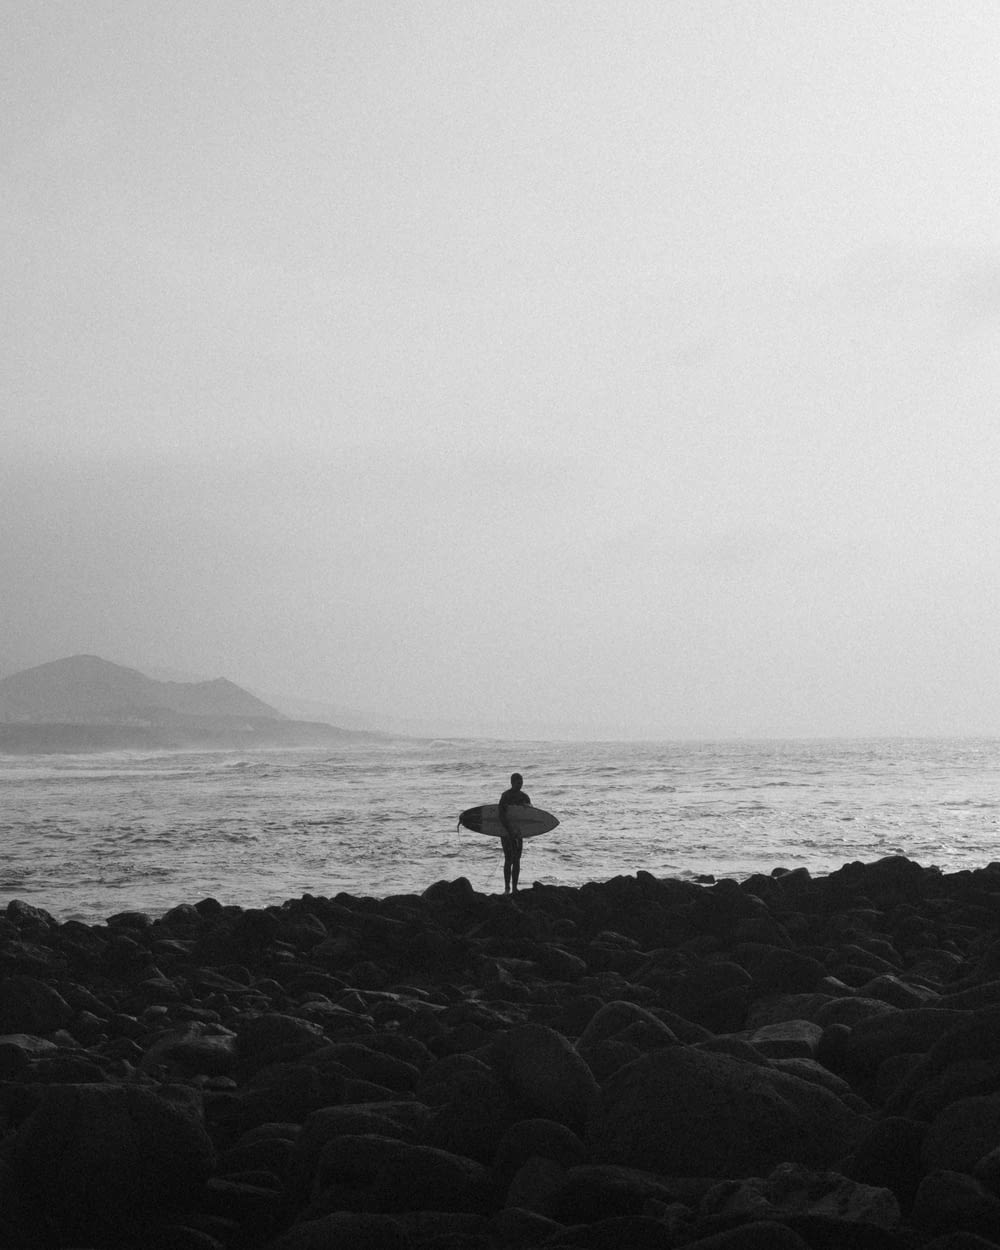 a person holding a surfboard on a rocky beach